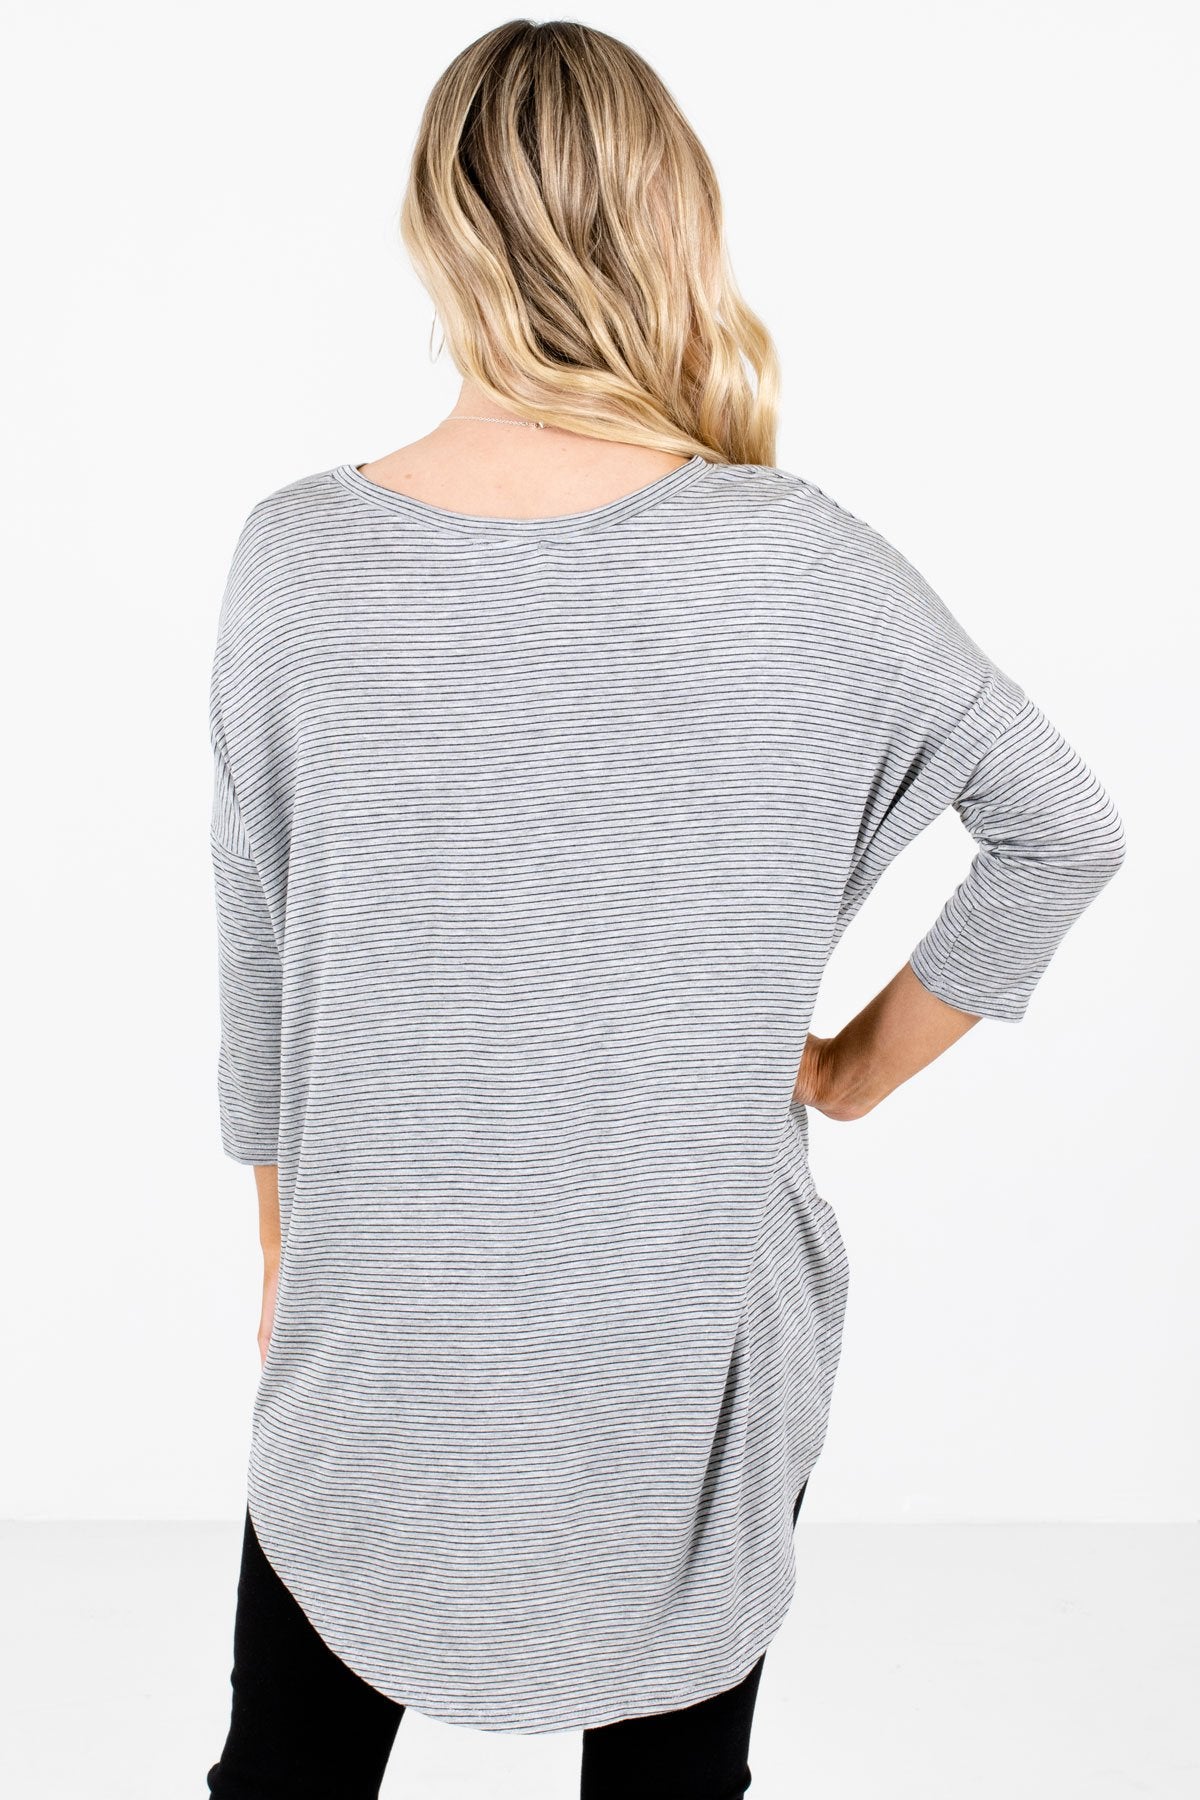 Women’s Gray ¾ Length Sleeve Boutique Tops